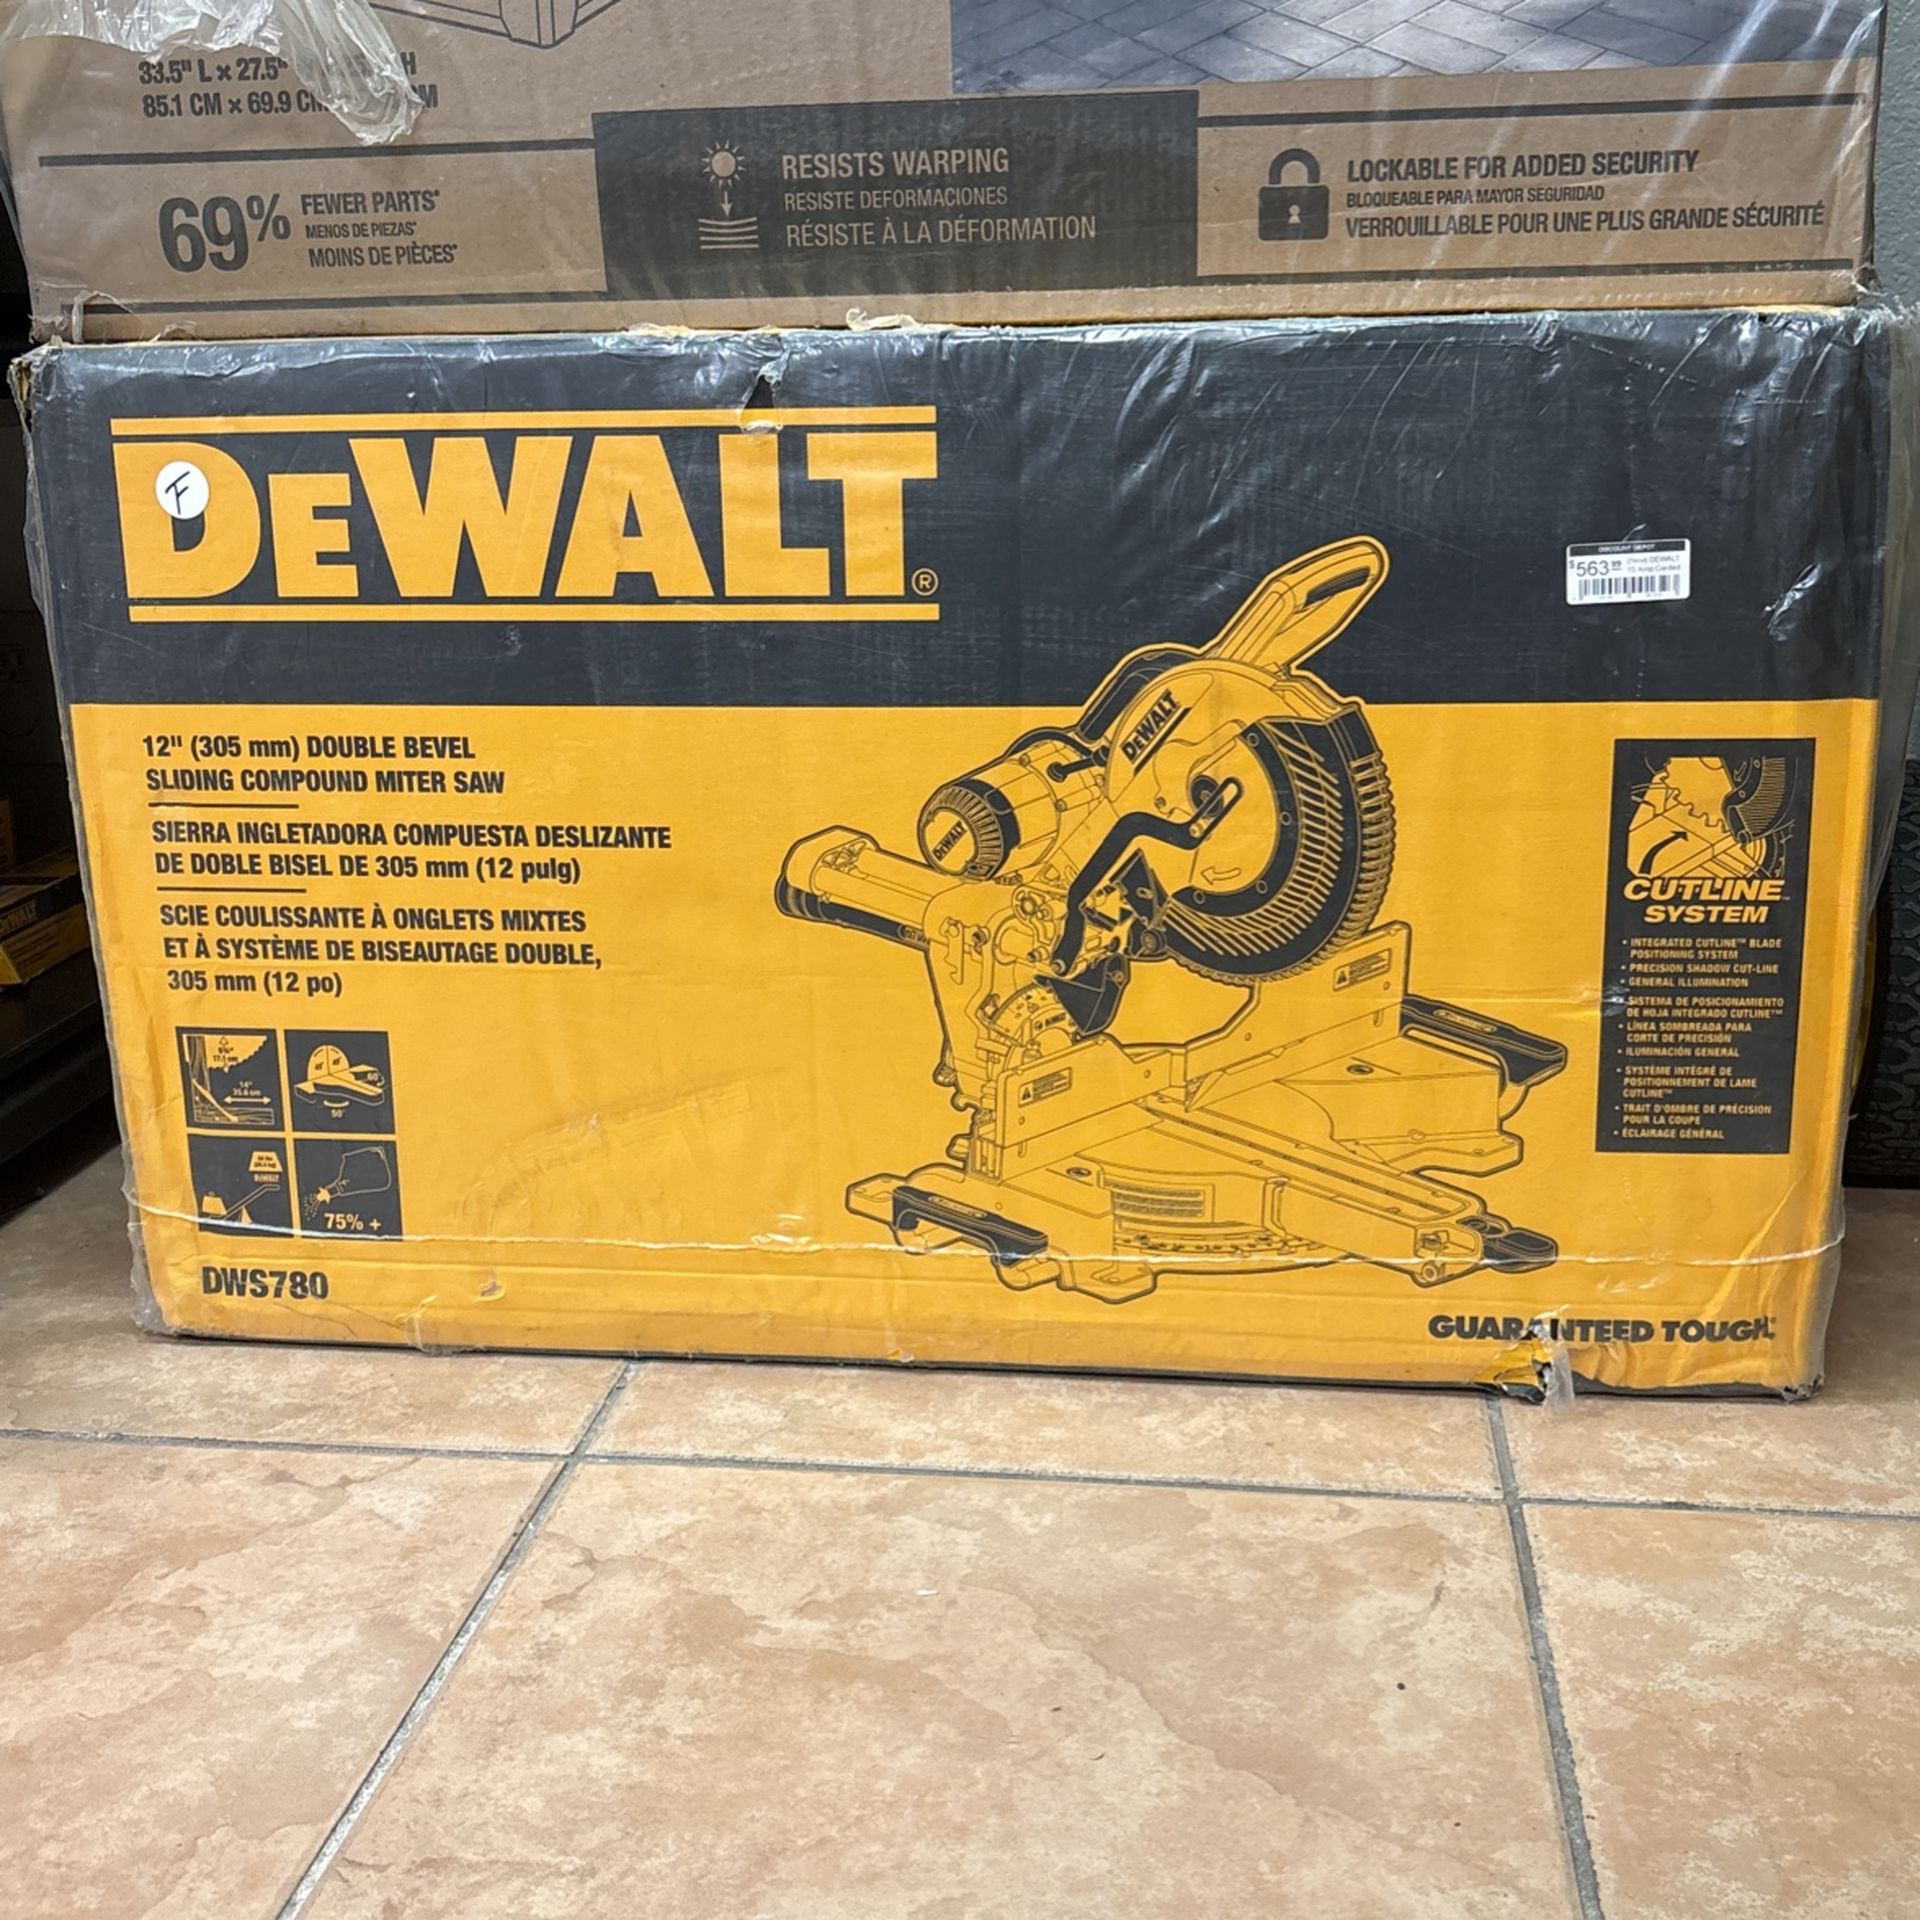 DEWALT 15 Amp Corded 12 in. Double Bevel Sliding Compound Miter Saw with XPS technology, Blade Wrench and Material Clamp